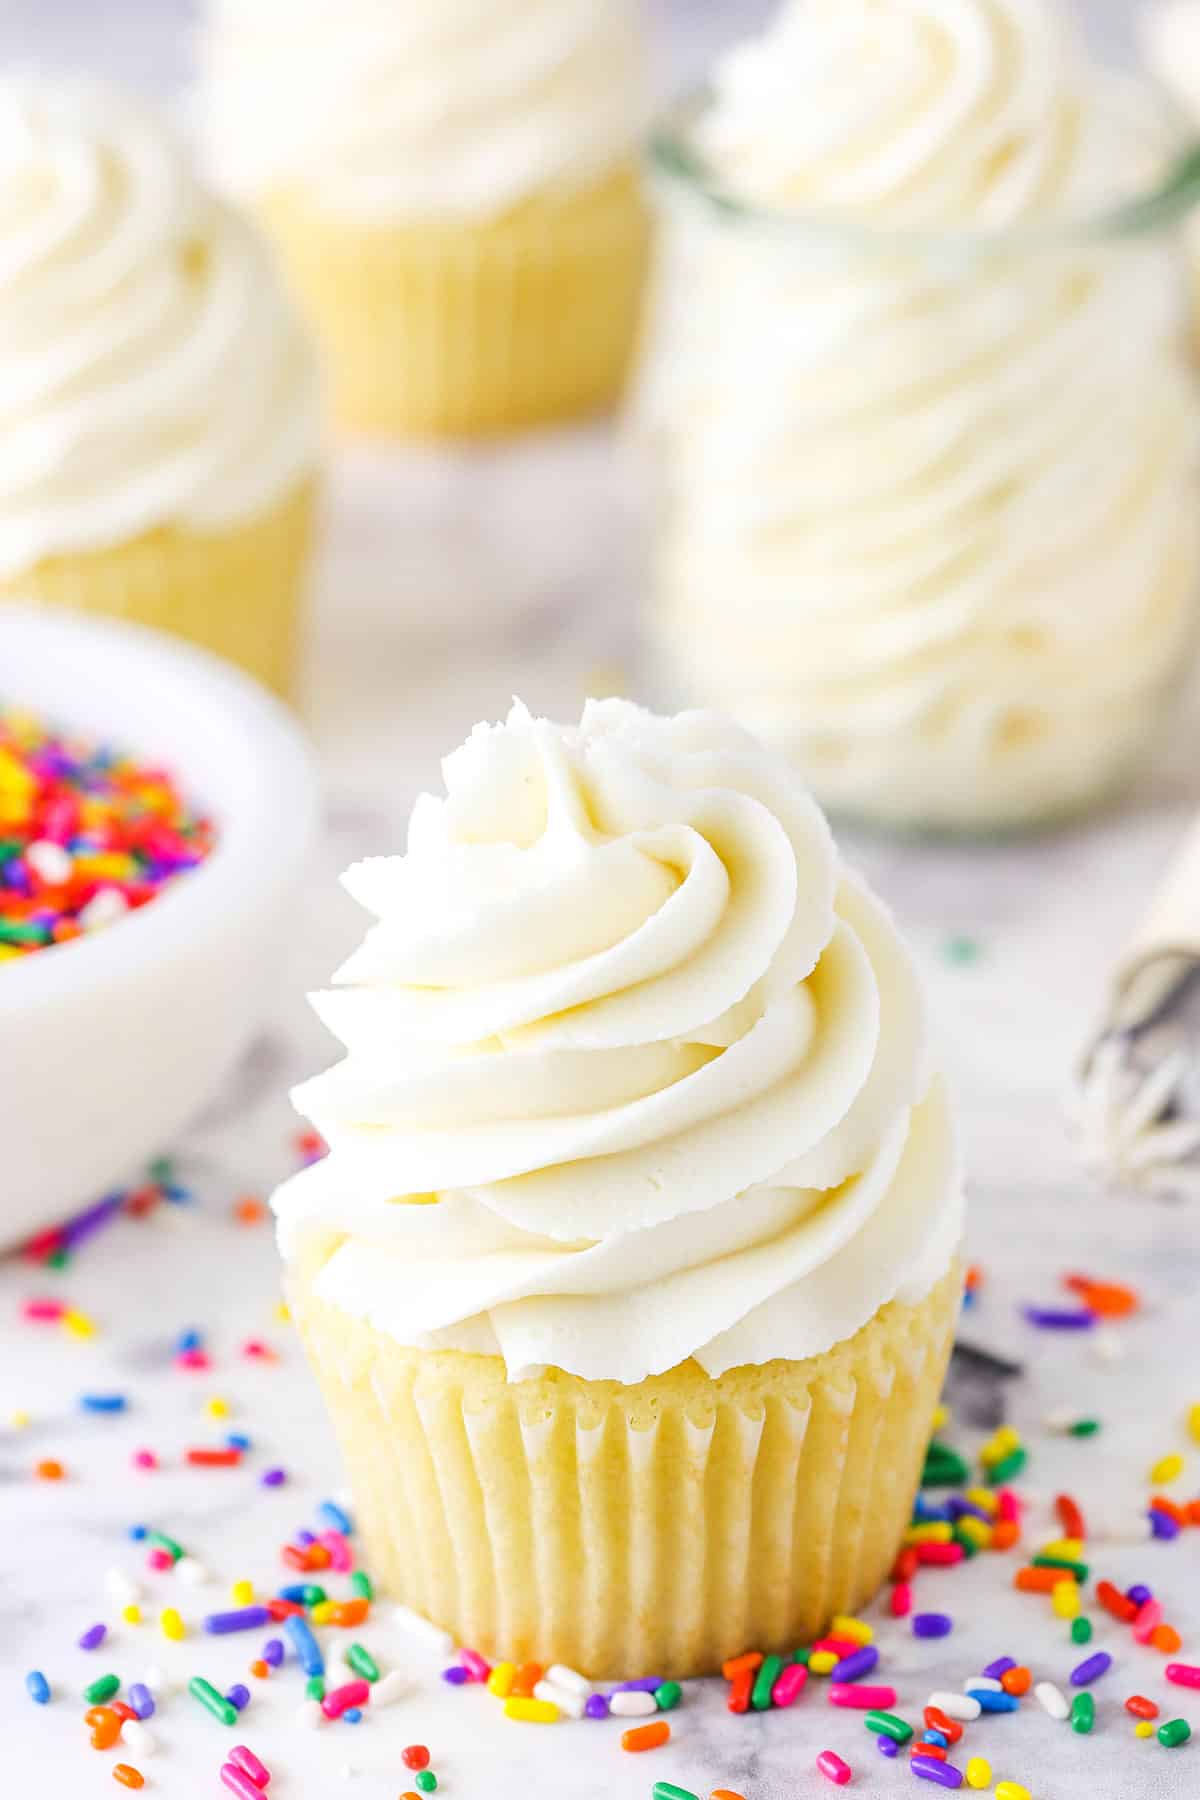 Vanilla Buttercream Frosting piped onto a vanilla cupcake surrounded by multicolored sprinkles